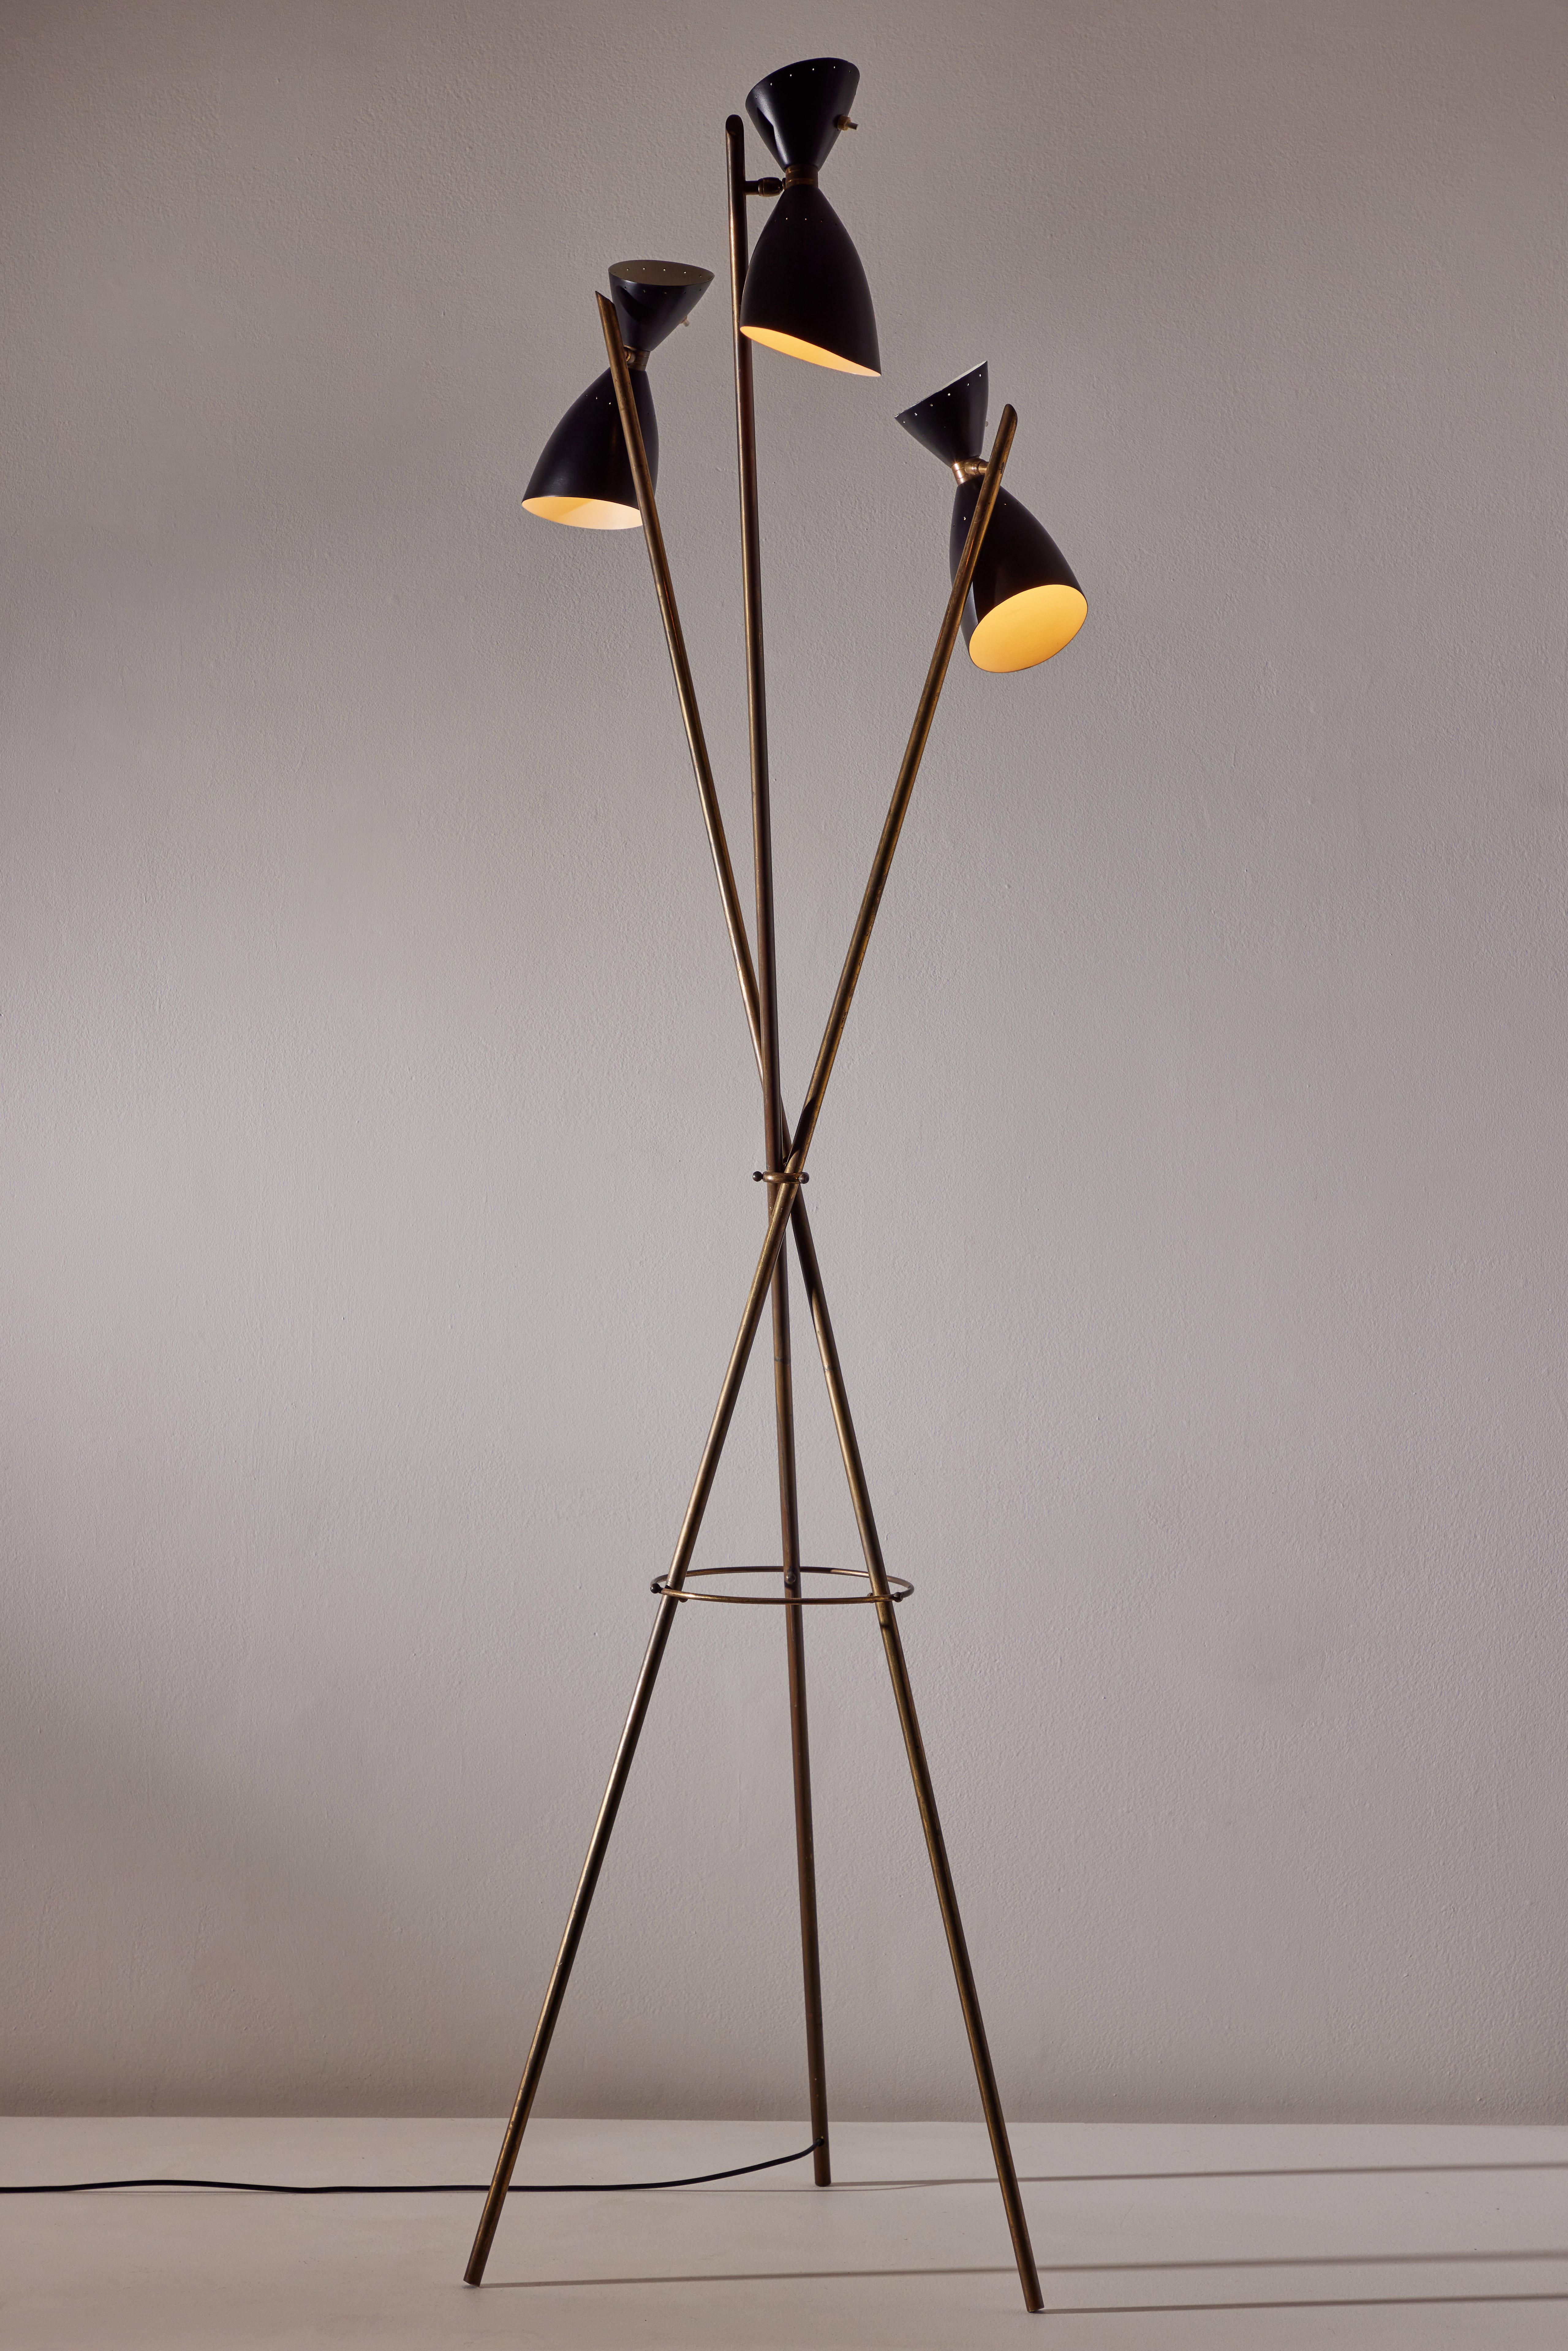 Floor lamp designed and manufactured in Italy, circa 1950's. Enameled metal shades, brass frame. Original cord. Shades articulate to various positions. We recommend three E27 60w maximum bulbs. Bulbs provided as a one time courtesy.